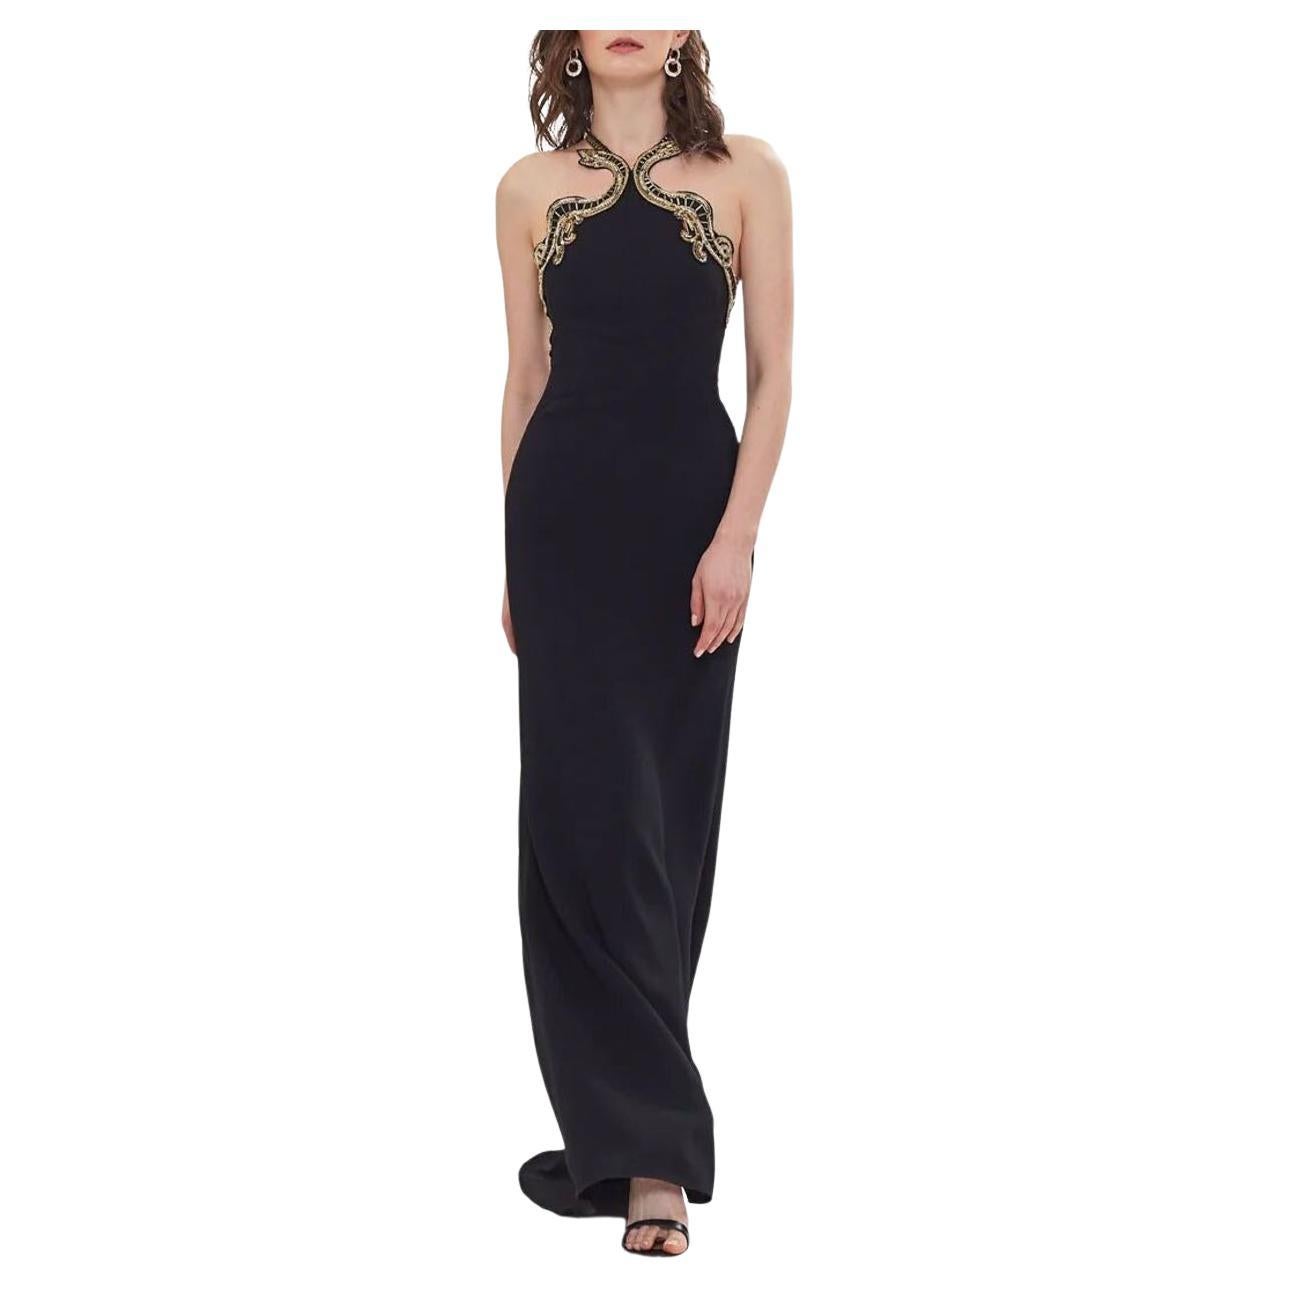 ROBERTO CAVALLI

BLACK VISCOSE GLASS BEADED EVENING GOWN

Content:  95% viscose, 5% elastane

Made in Italy

Pre owned, good condition!
 100% authentic guarantee 

       PLEASE VISIT OUR STORE FOR MORE GREAT ITEMS 



os